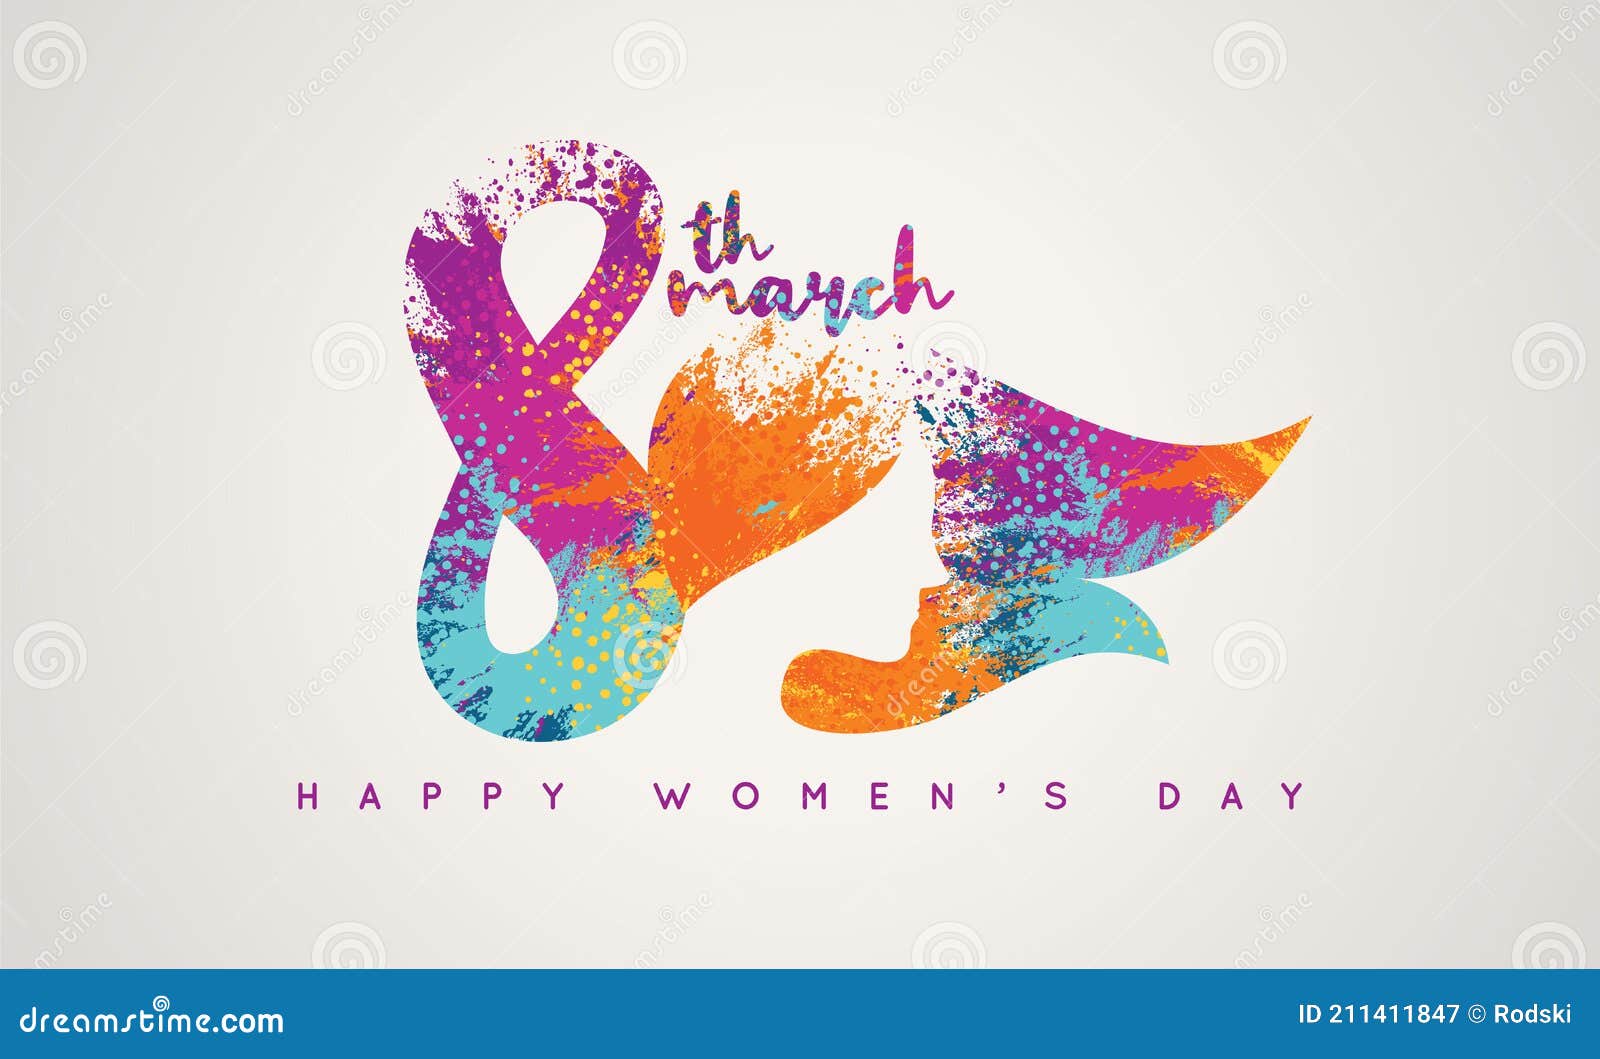 women`s day logo  with silhouette of a woman`s head.